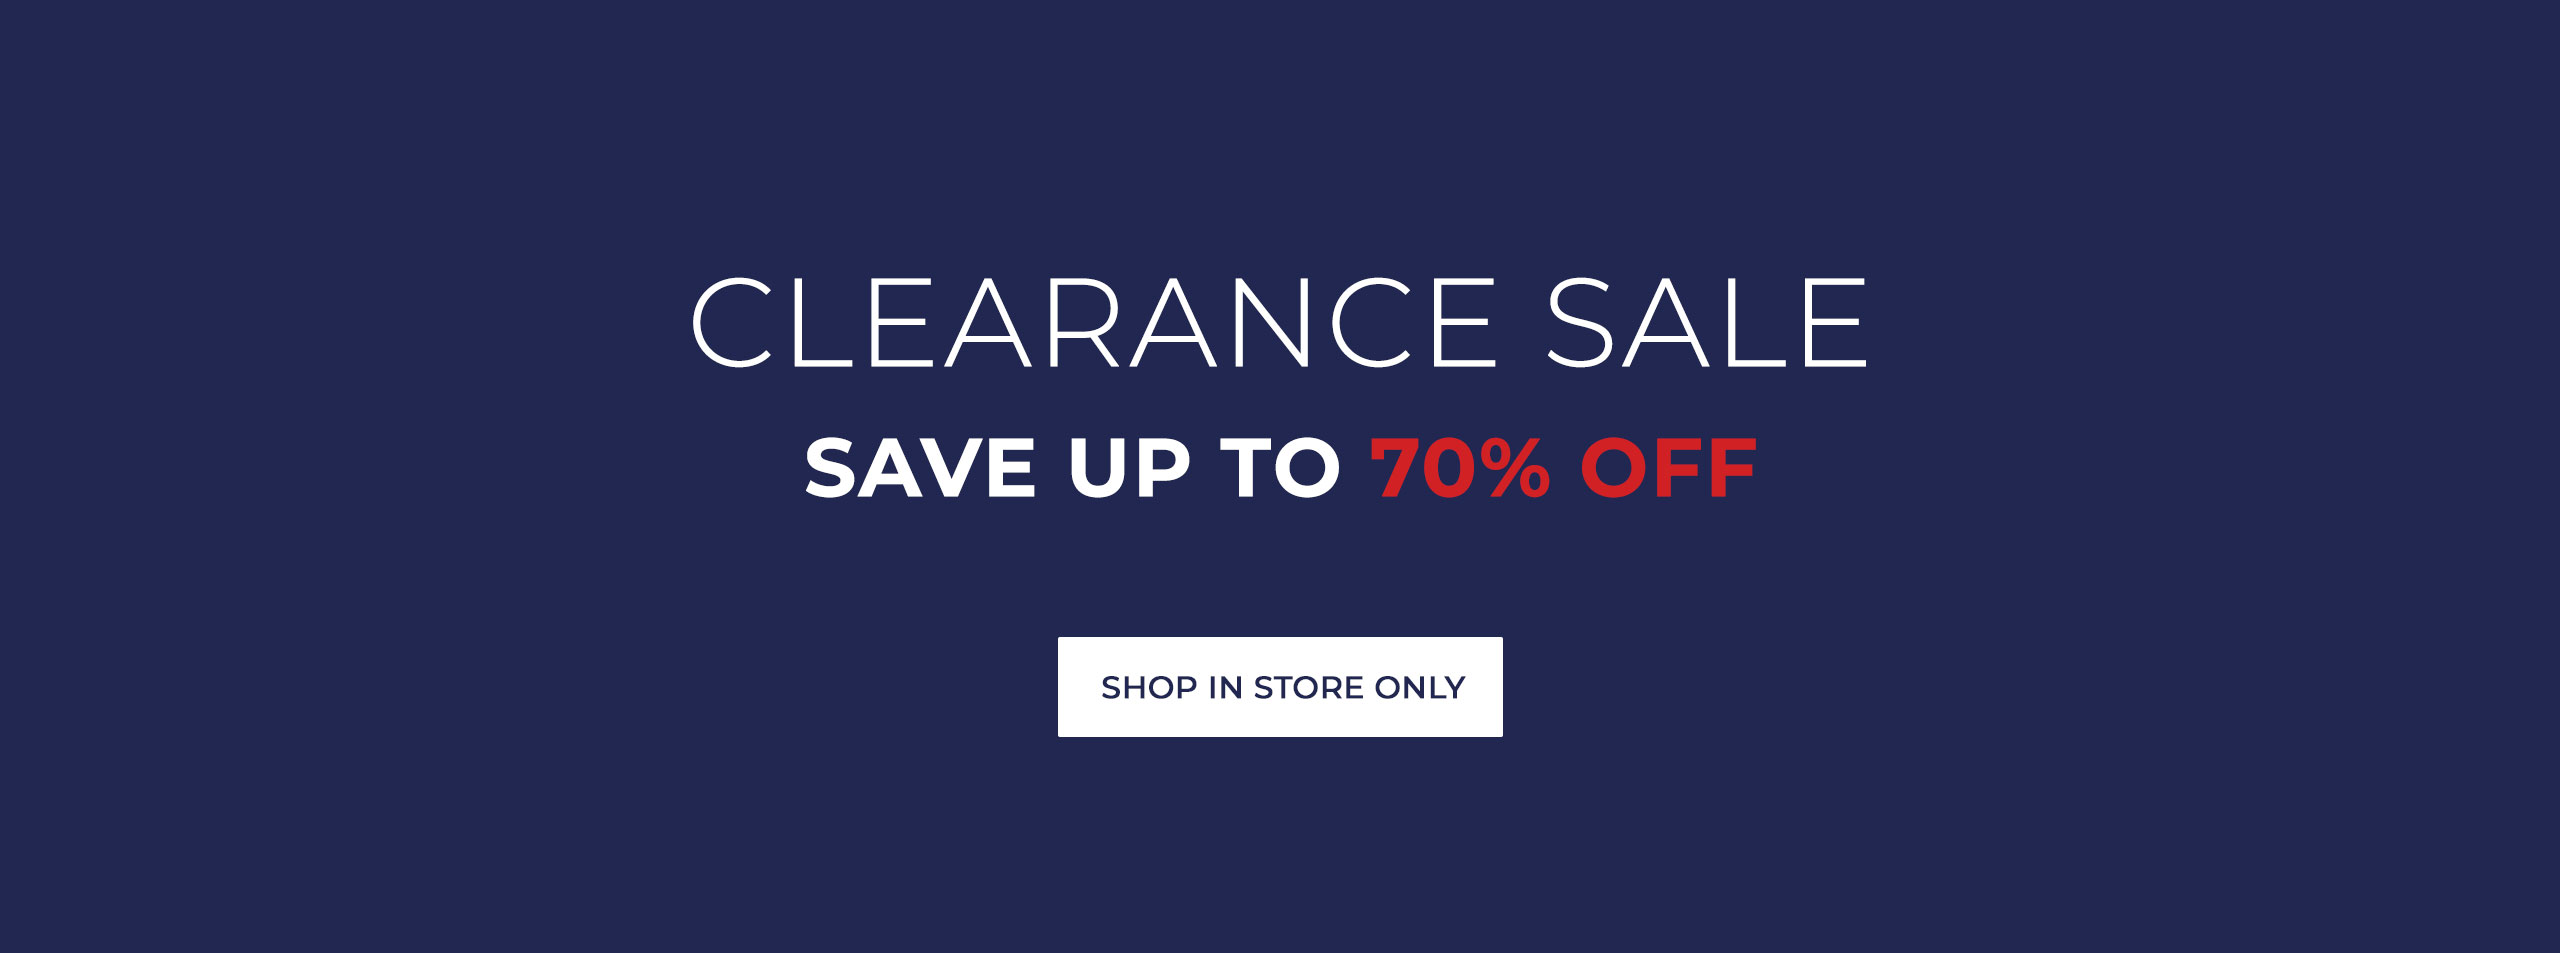 Clearance Sale Shop In Store